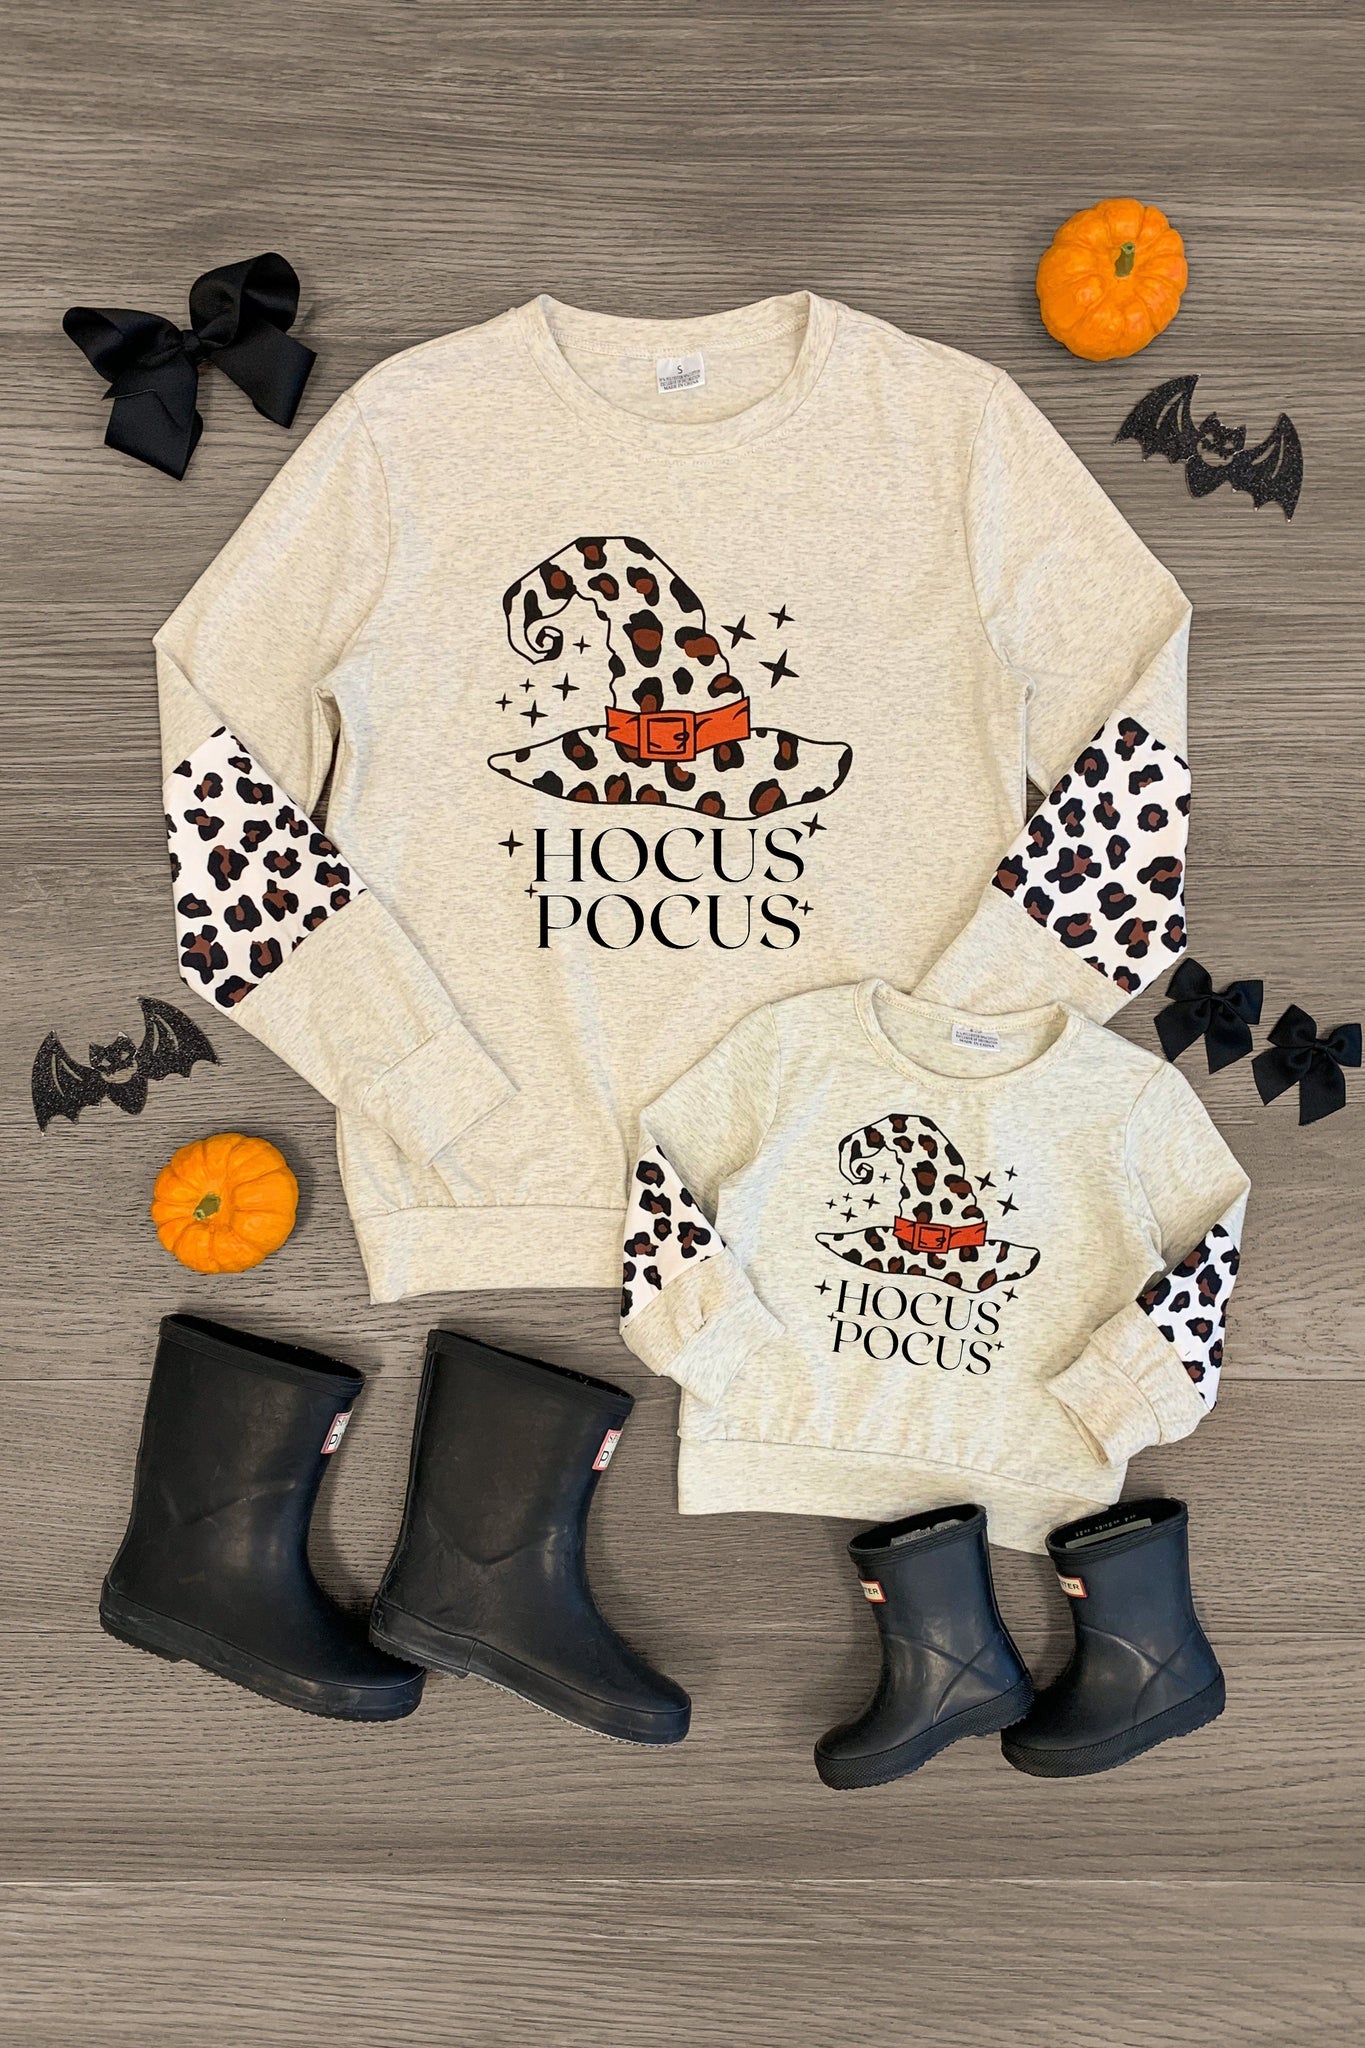 Mom & Me - "Hocus Pocus" Long Sleeve Top - Sparkle in Pink